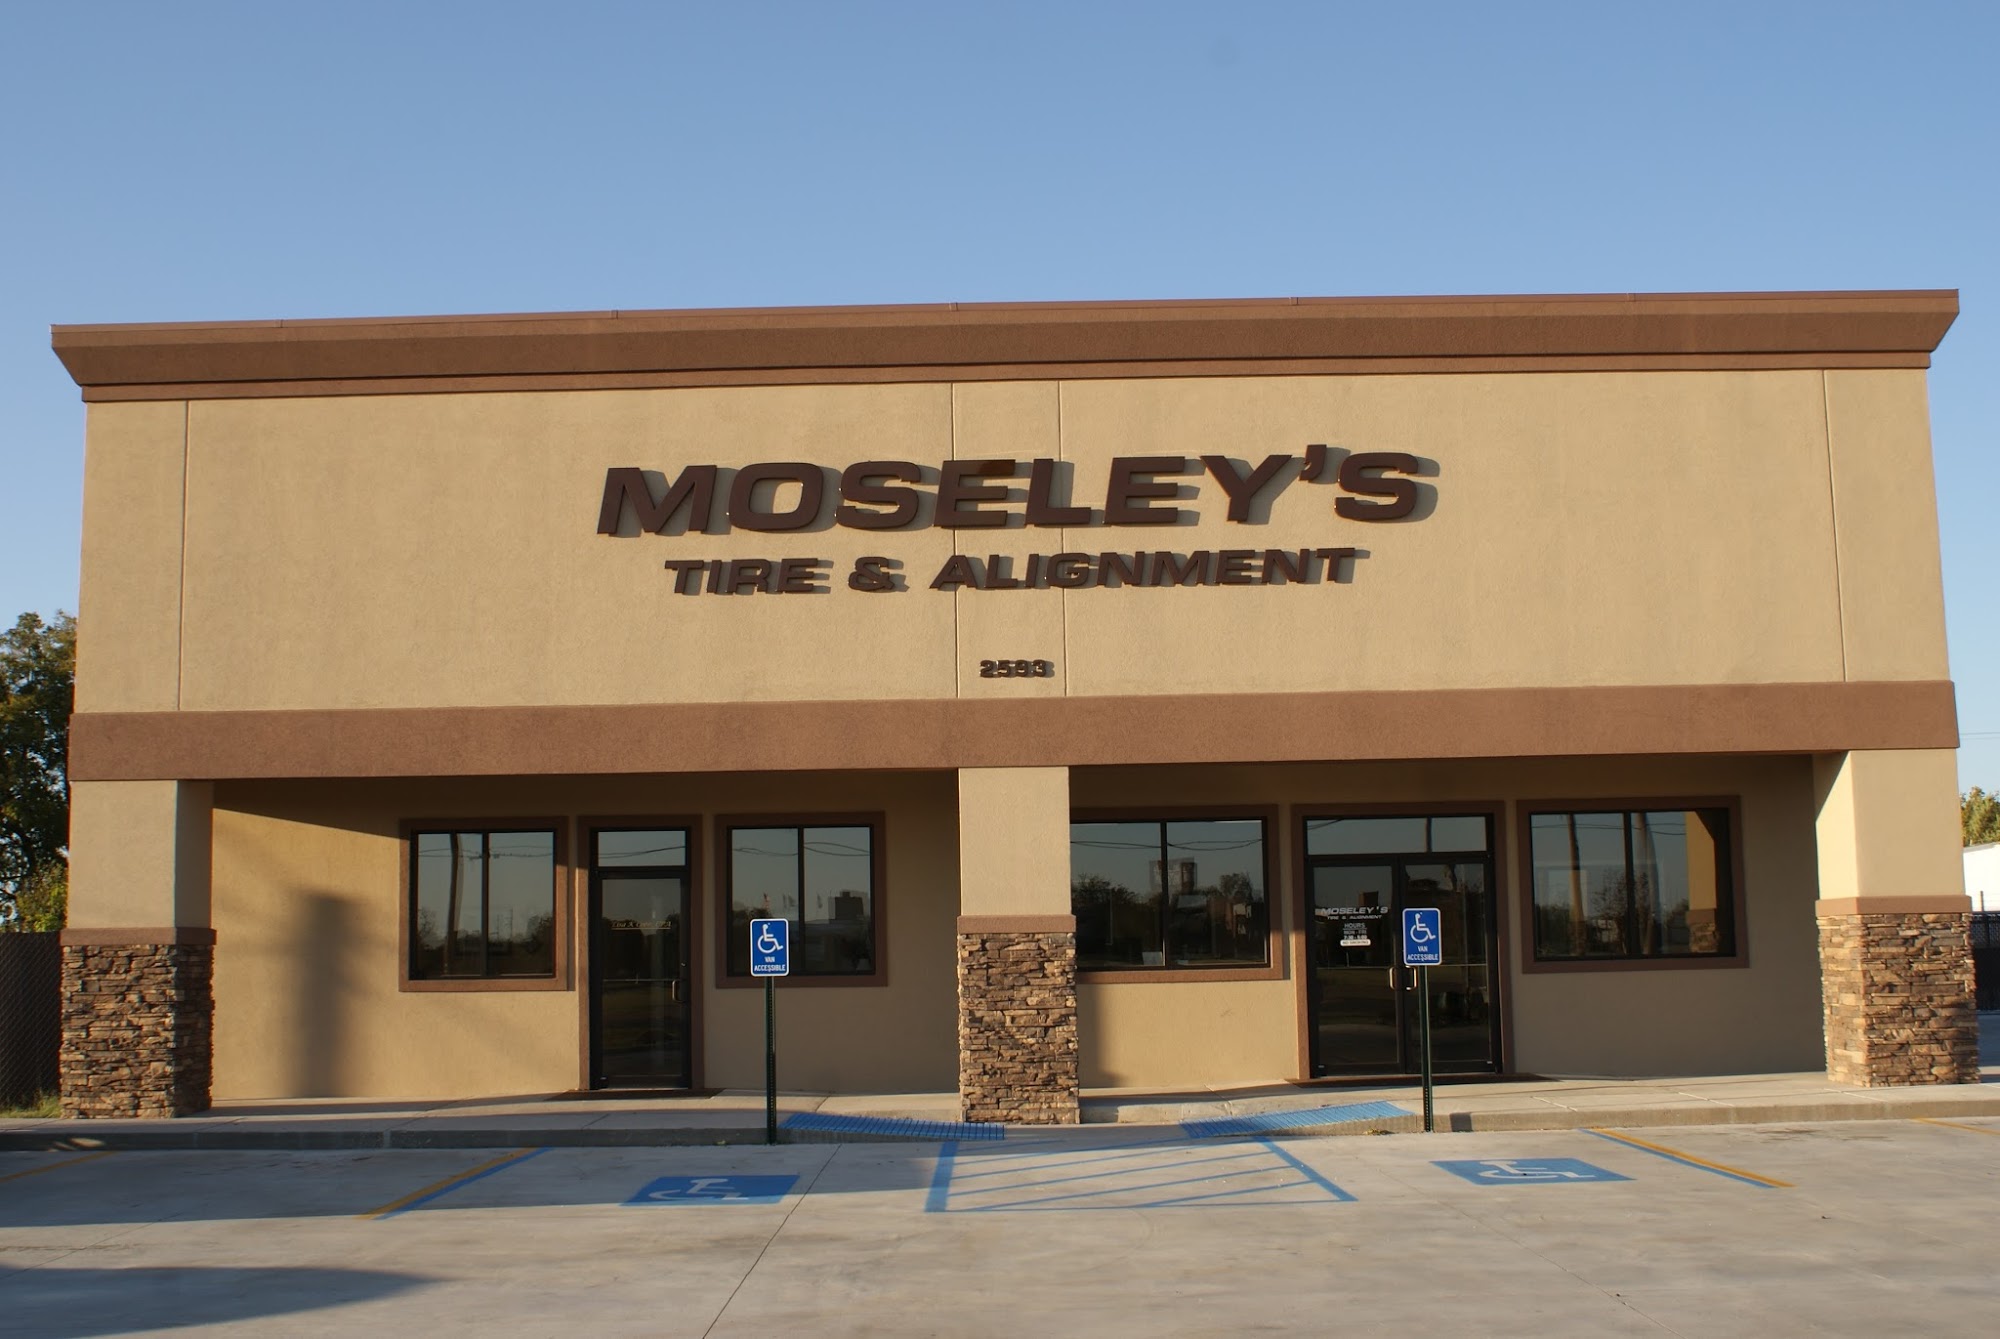 Moseley's Tire & Alignment